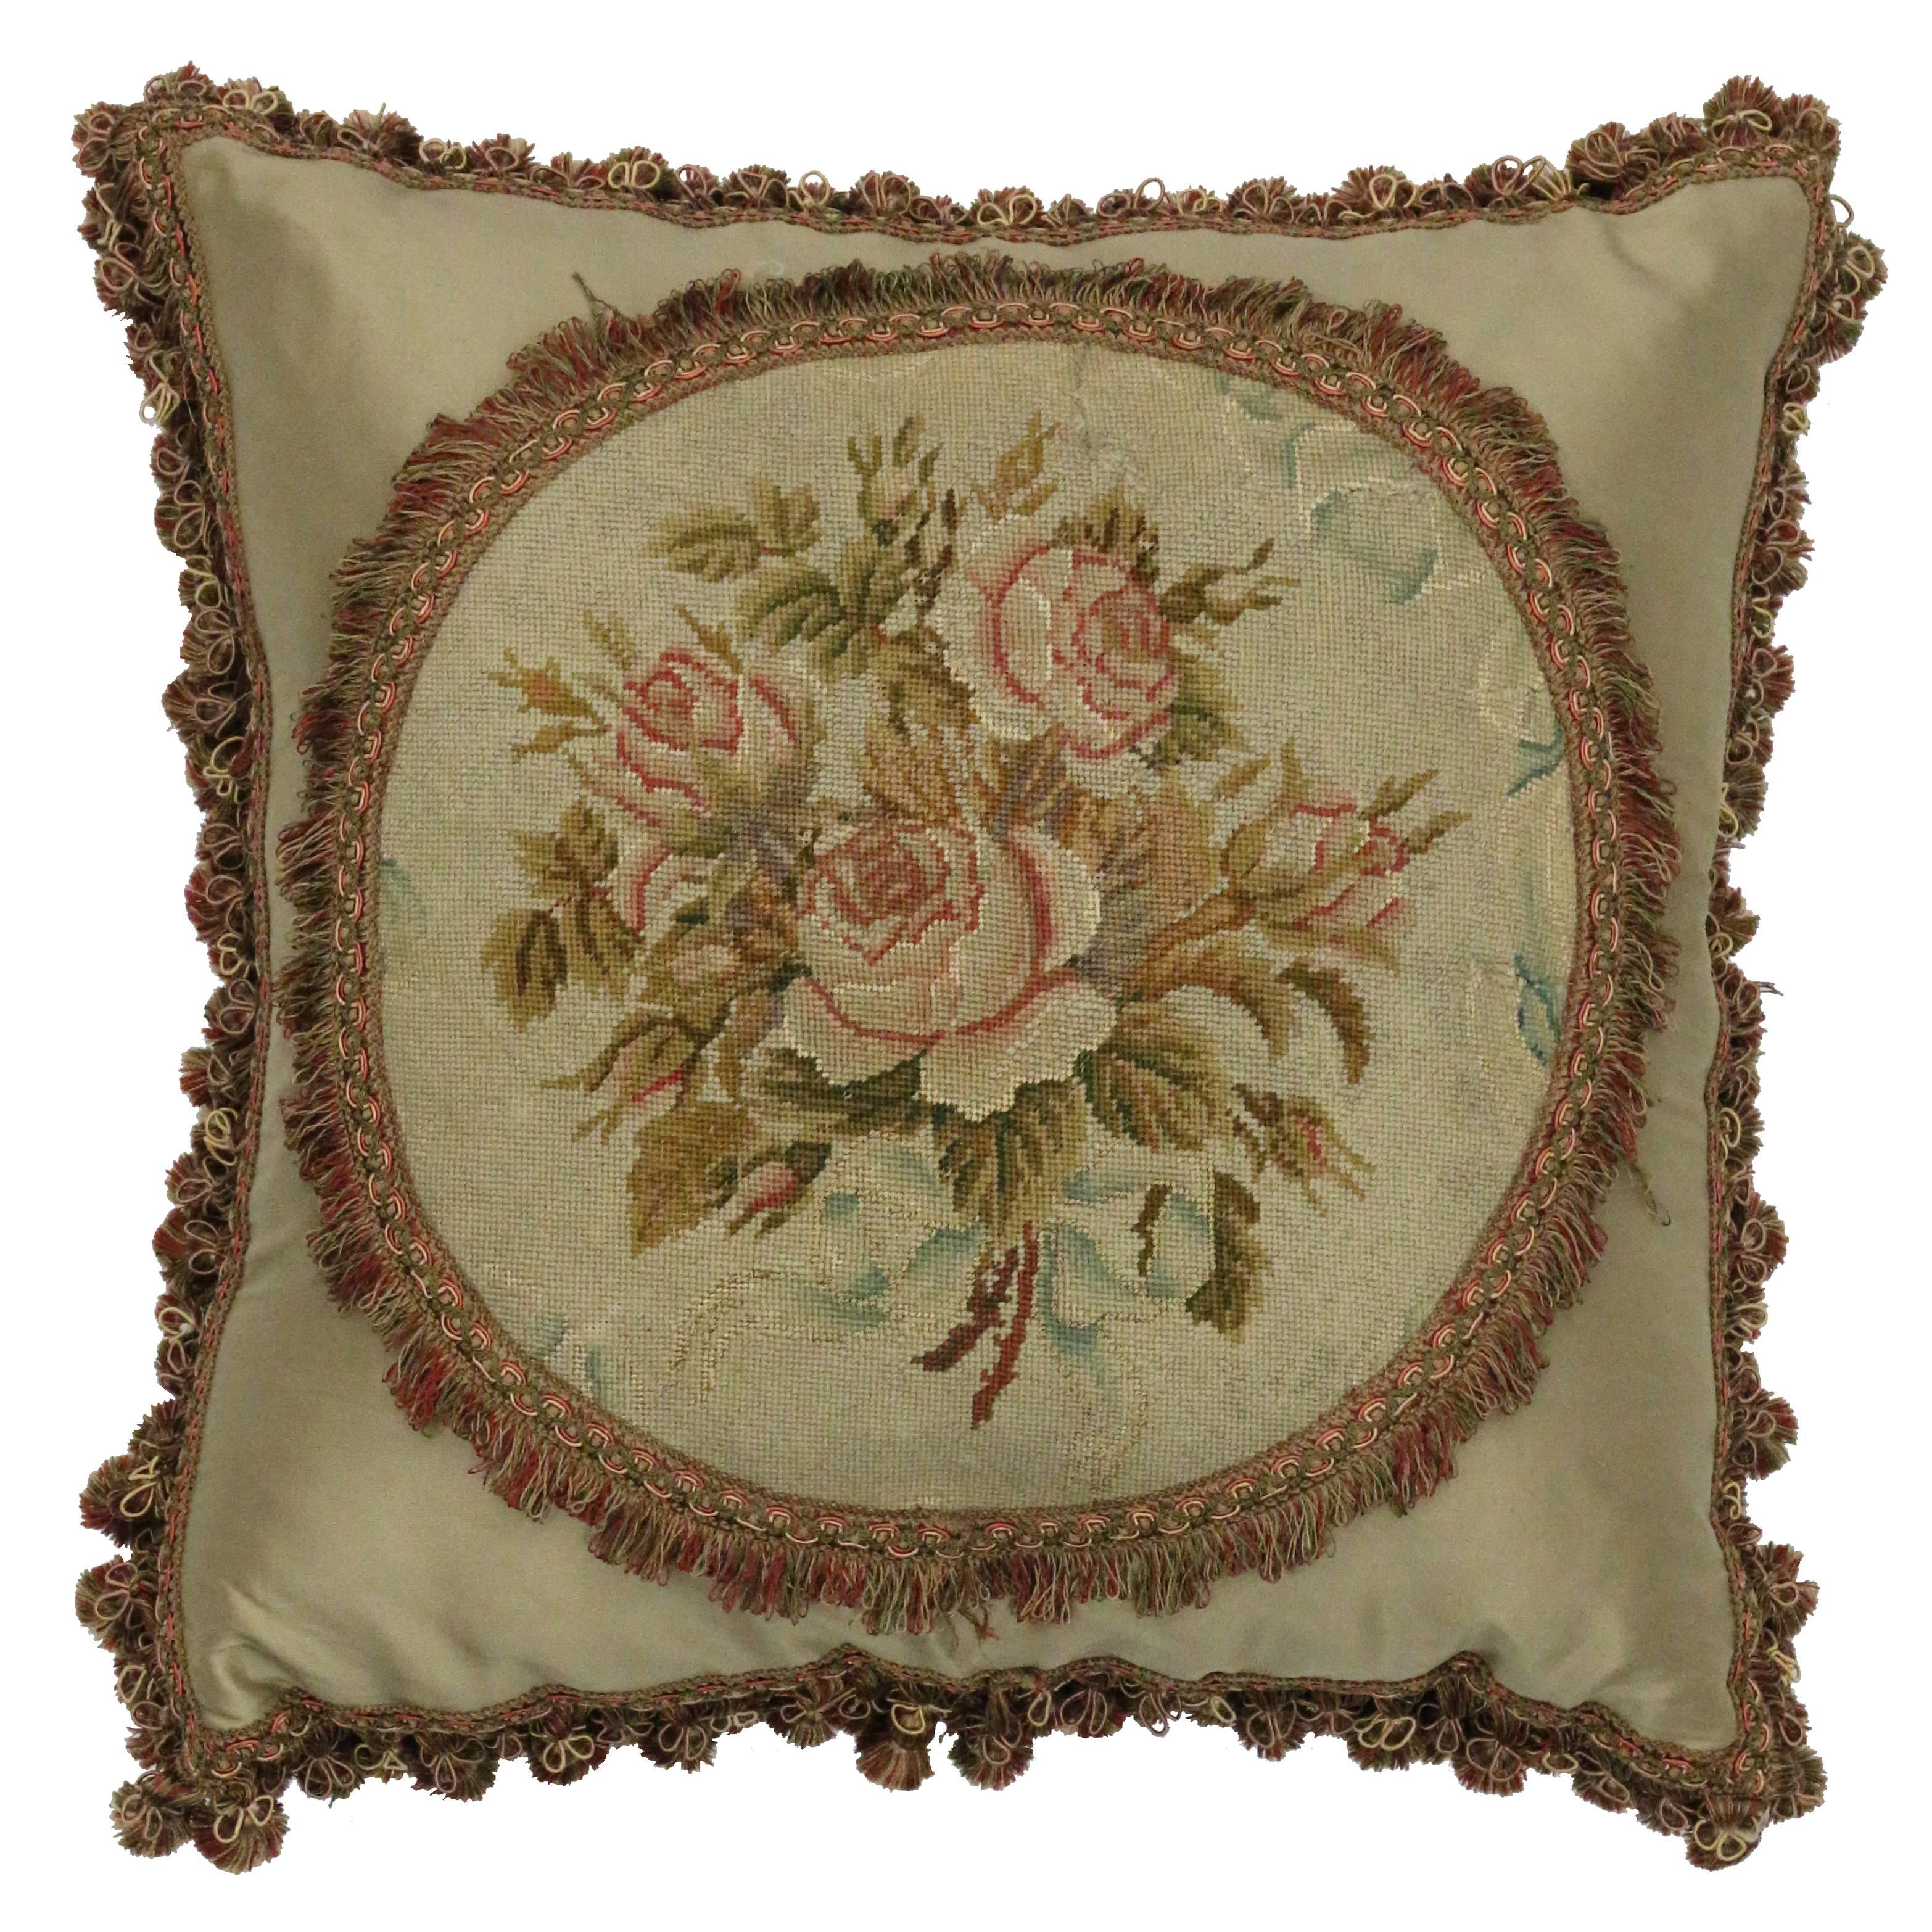 Late 19th Century Antique European Needlepoint Pillow with Aubusson Roses